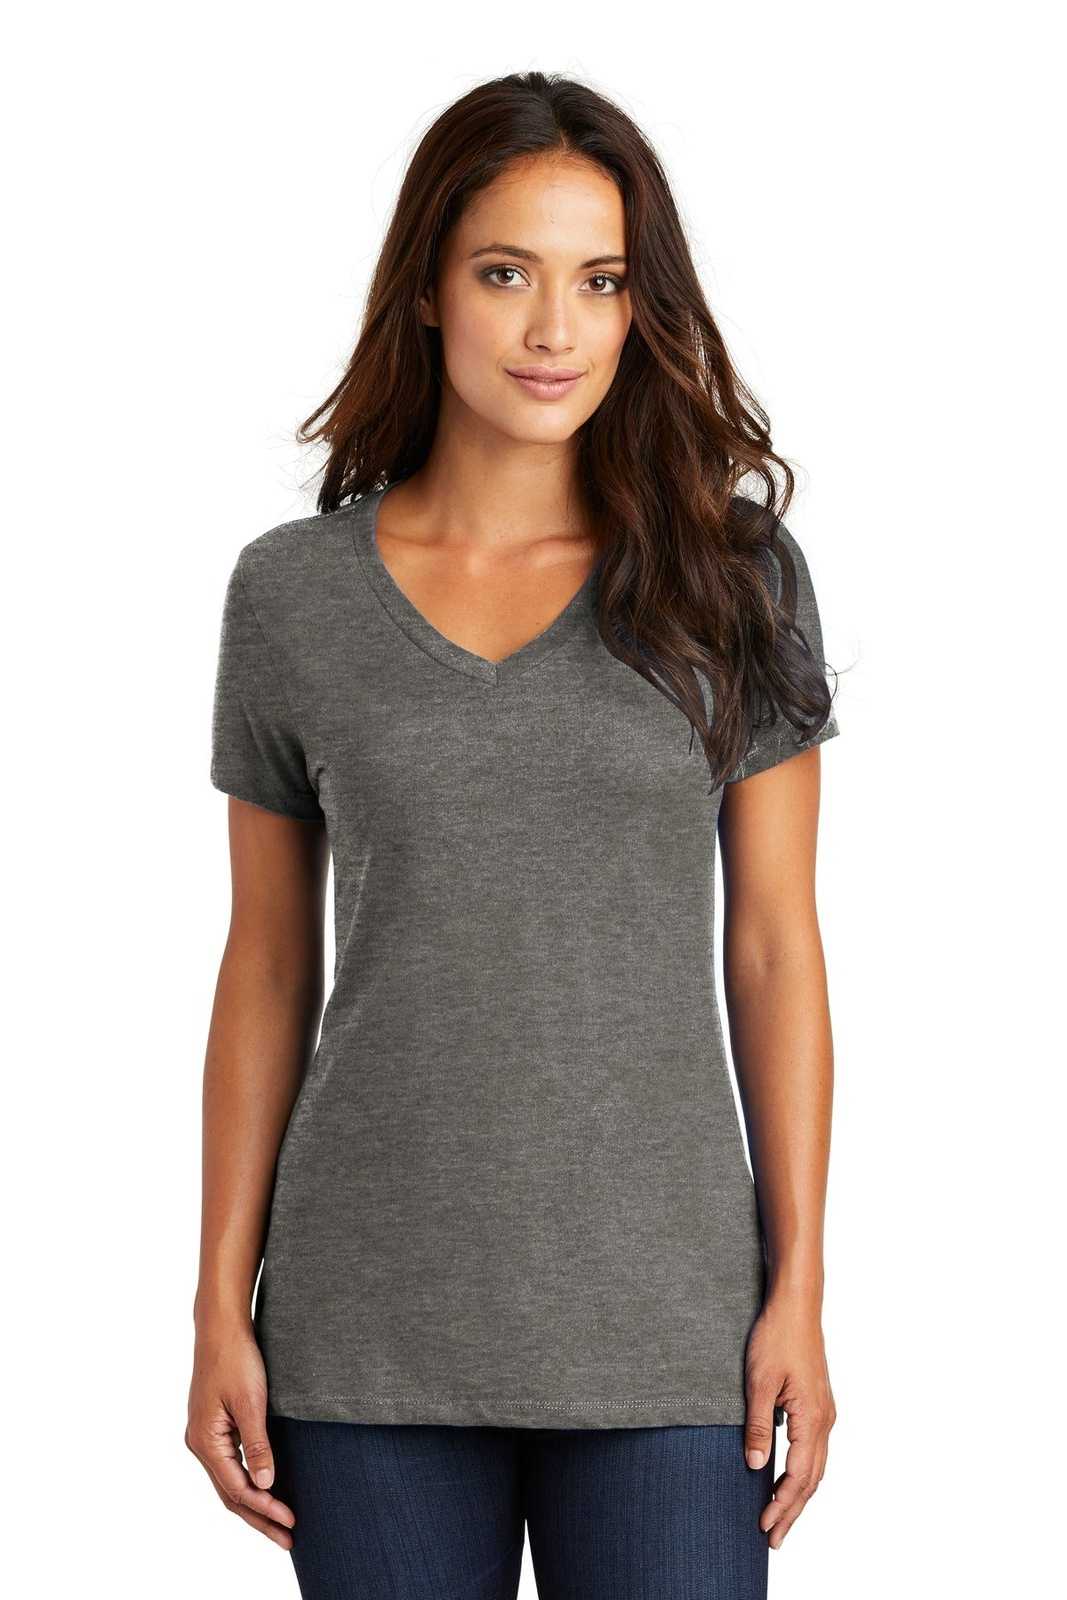 District DM1170L Women's Perfect Weight V-Neck Tee - Heathered Charcoal - HIT a Double - 1